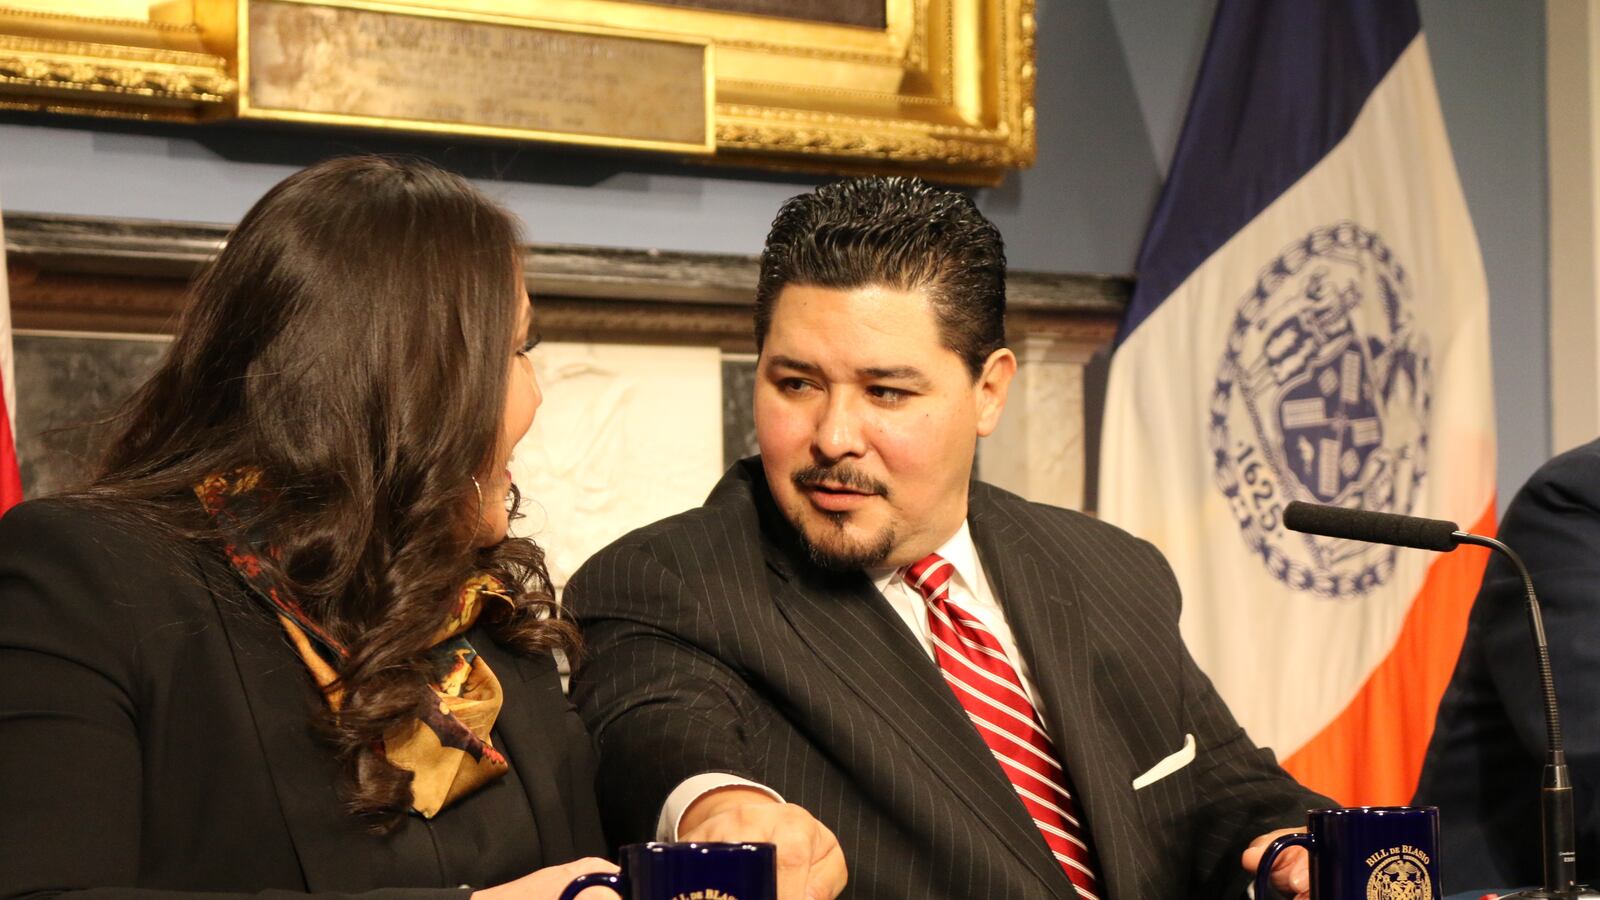 Houston Independent School District Superintendent Richard Carranza, who will become New York City schools chancellor, reaches for his wife's hand.